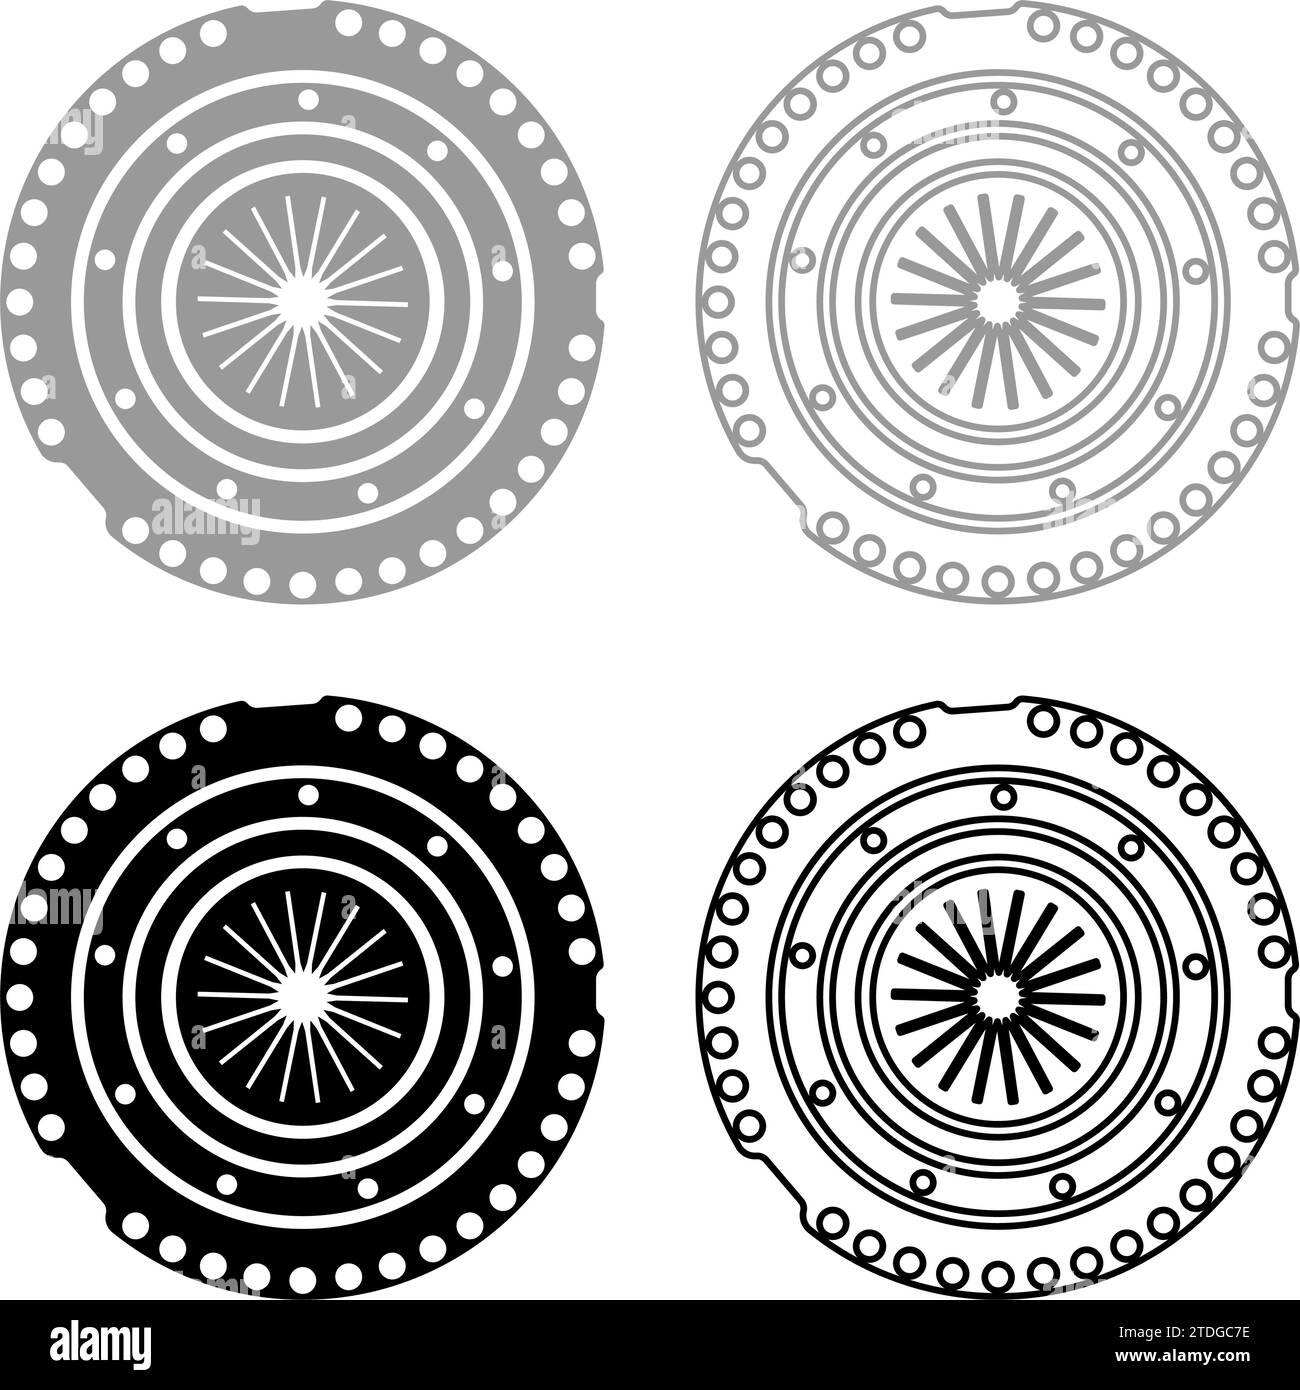 Car clutch basket cover cohesion transmission auto part plate kit repair service set icon grey black color vector illustration image simple solid Stock Vector